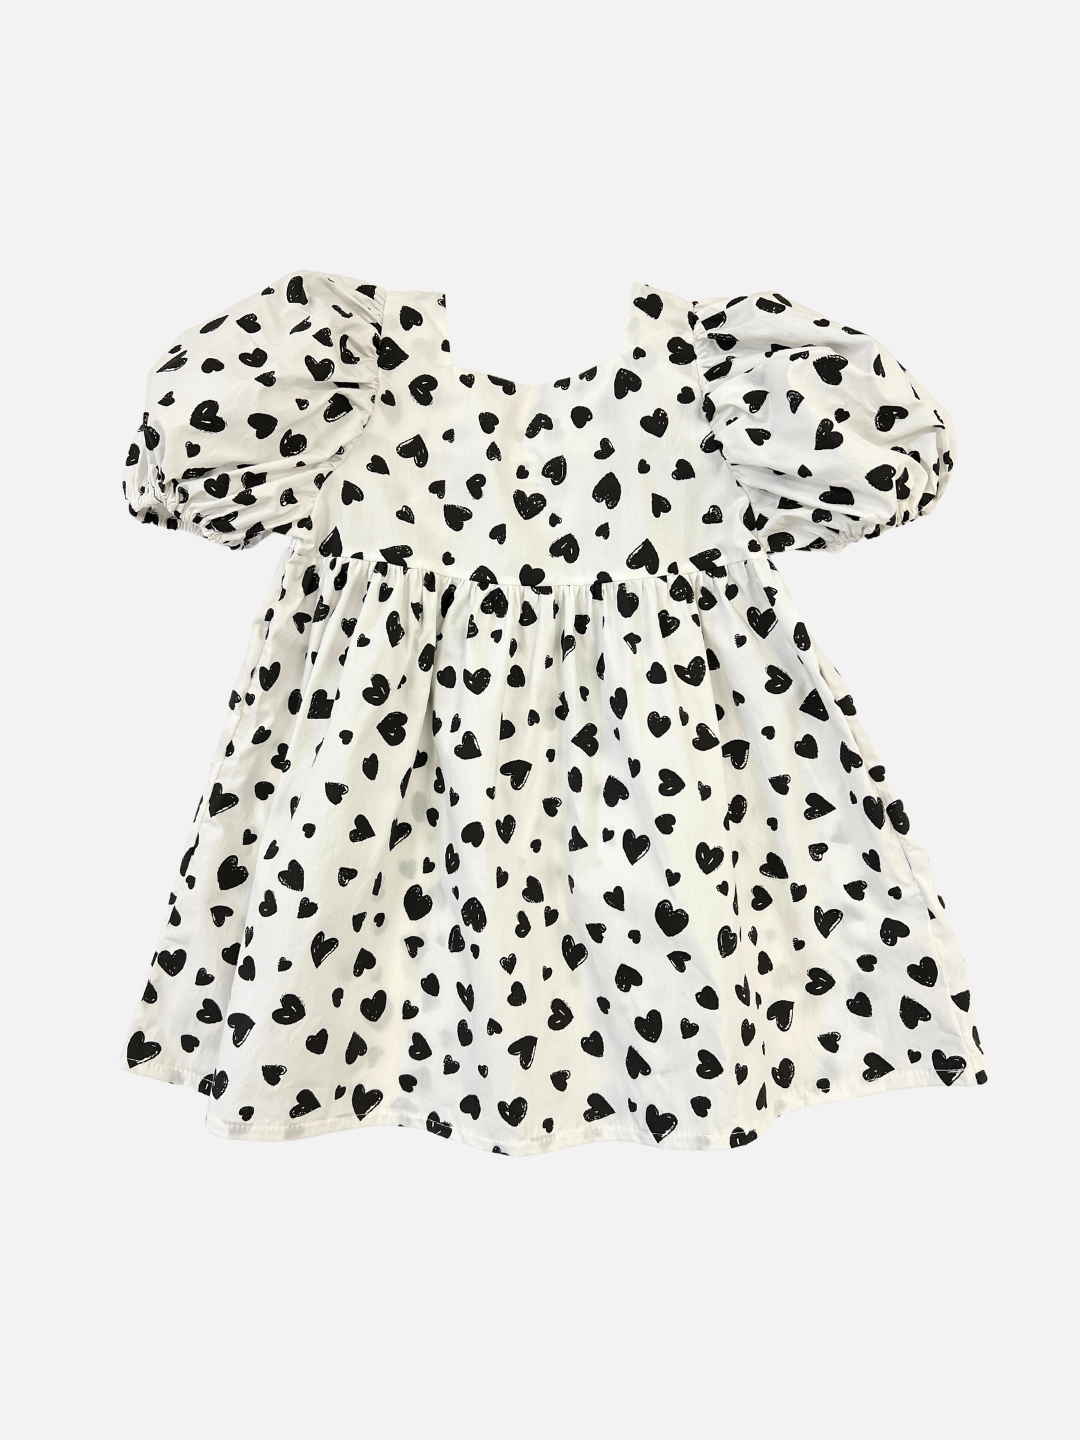 A kids' puff-sleeved dress with a pattern of black hearts on a white background